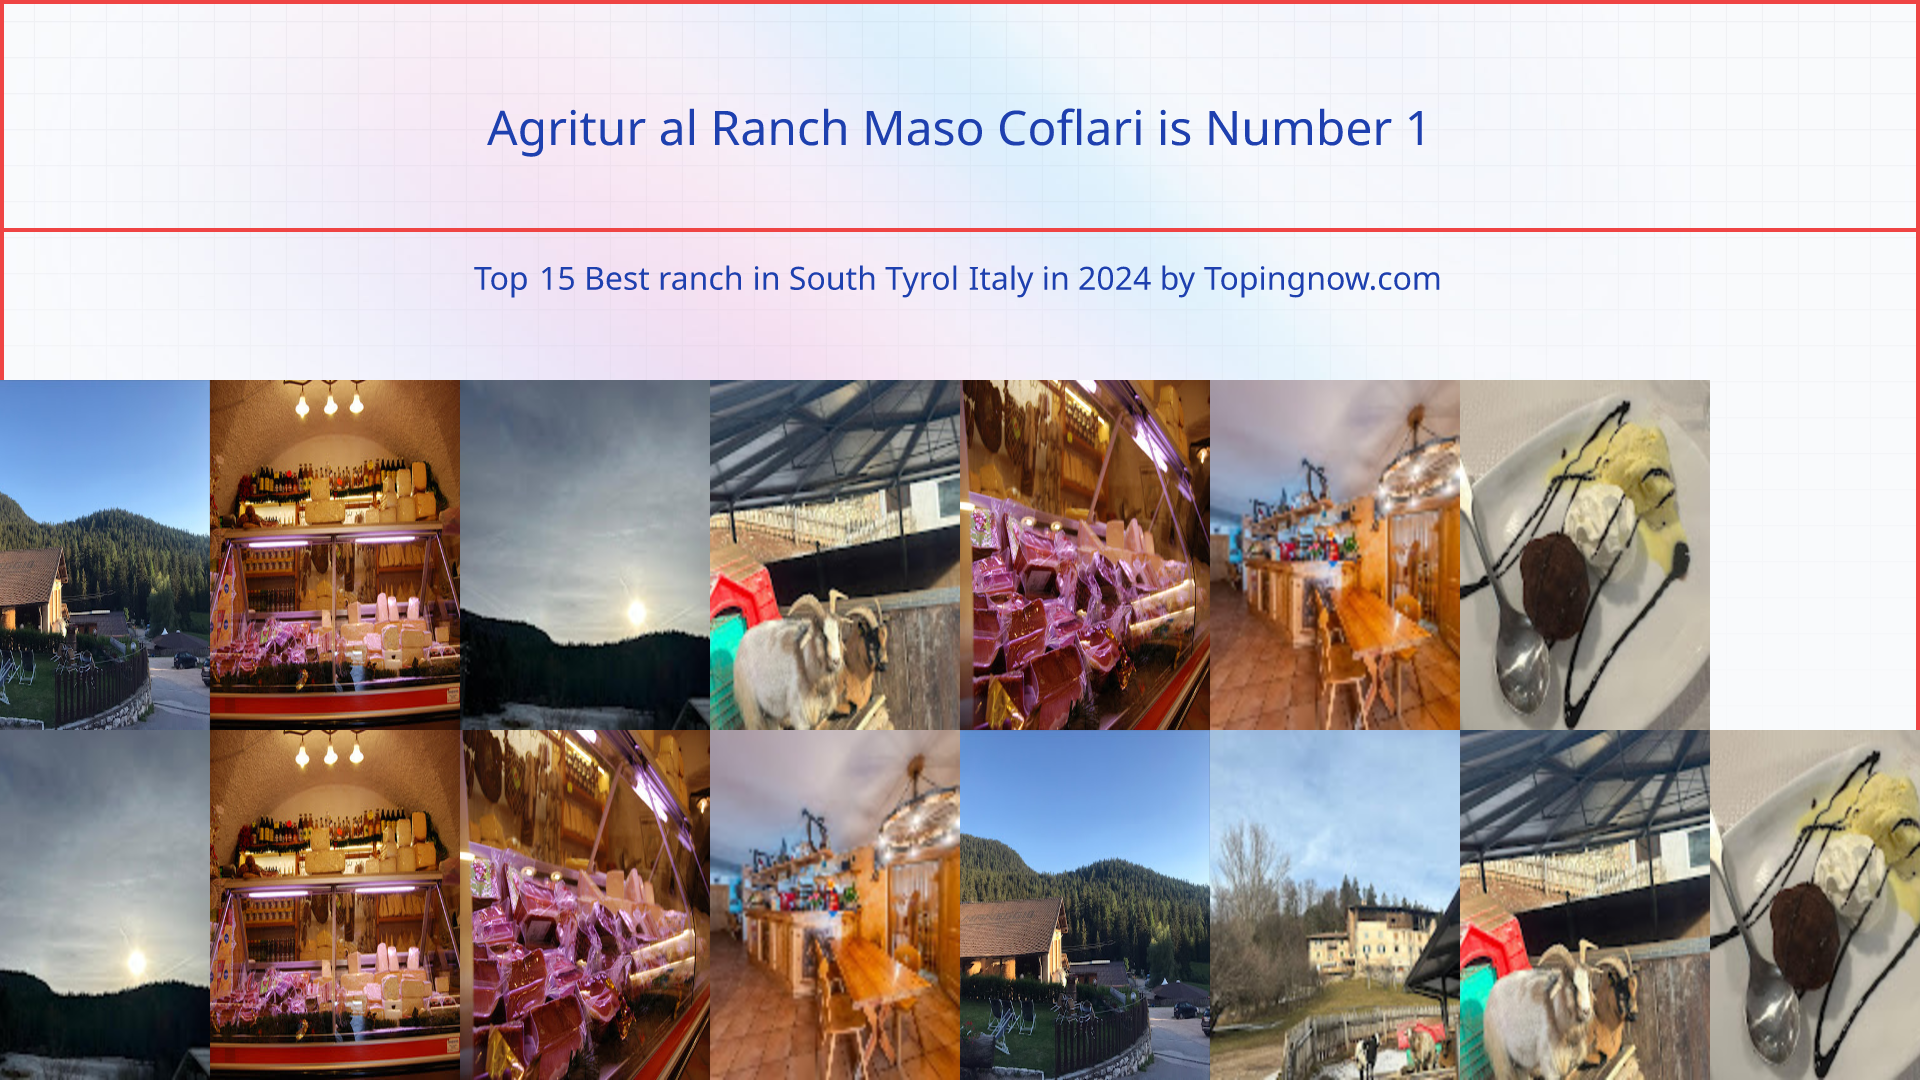 Agritur al Ranch Maso Coflari: Top 15 Best ranch in South Tyrol Italy in 2024